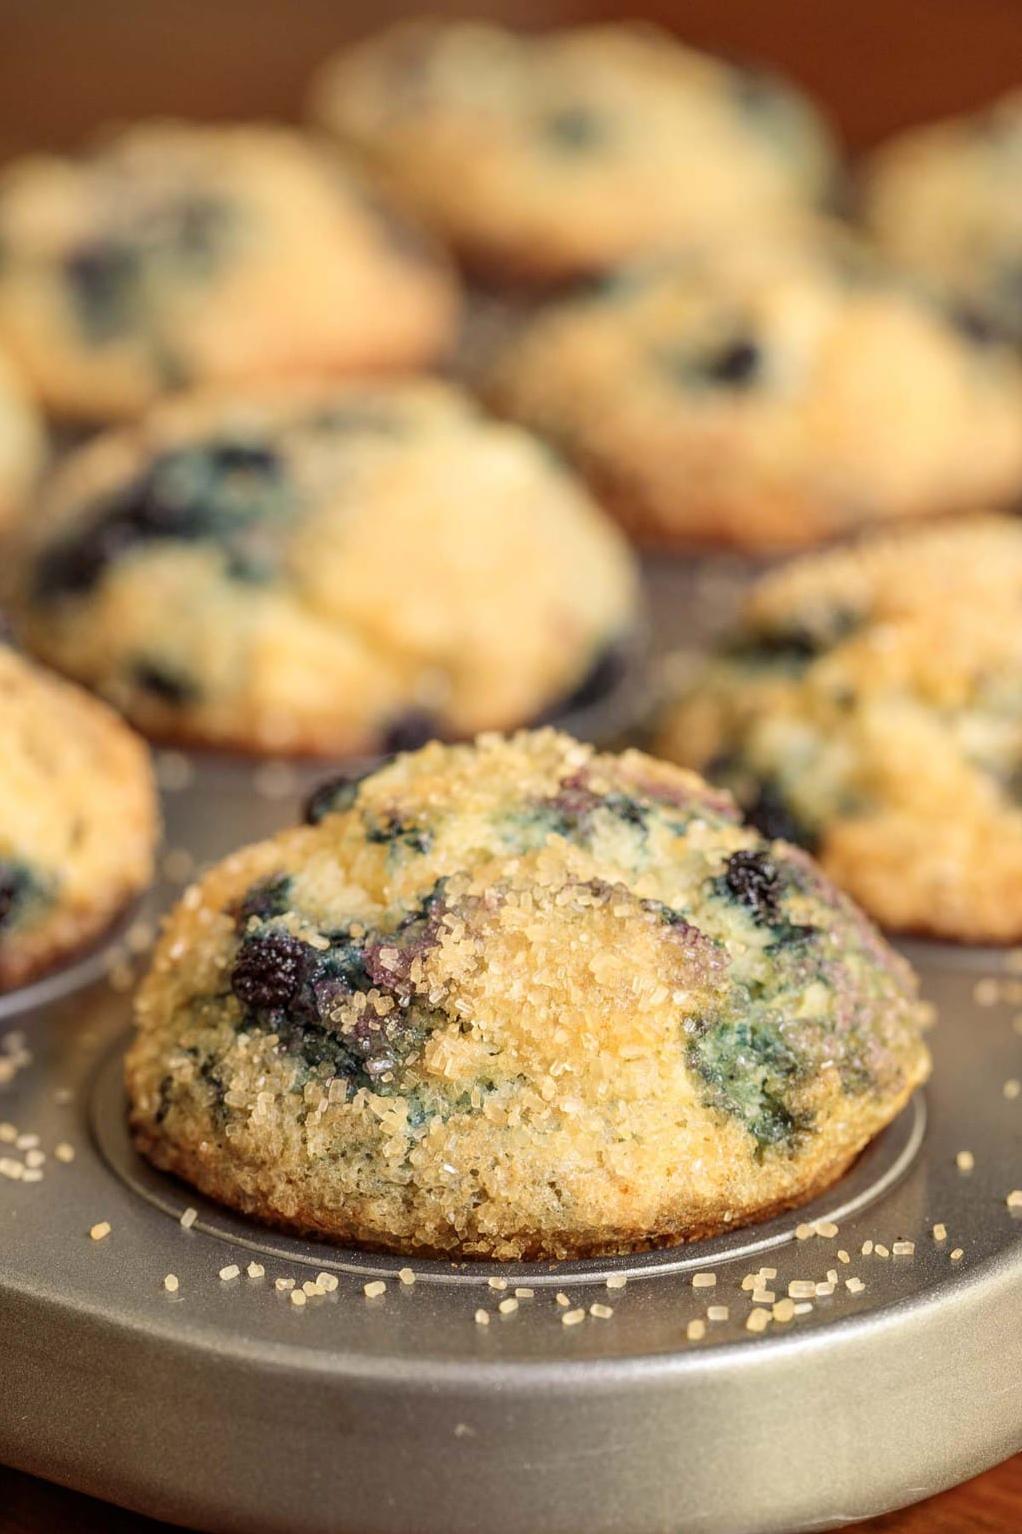  Prepare yourself for a mouth full of flavor with each bite of these blueberry muffins.